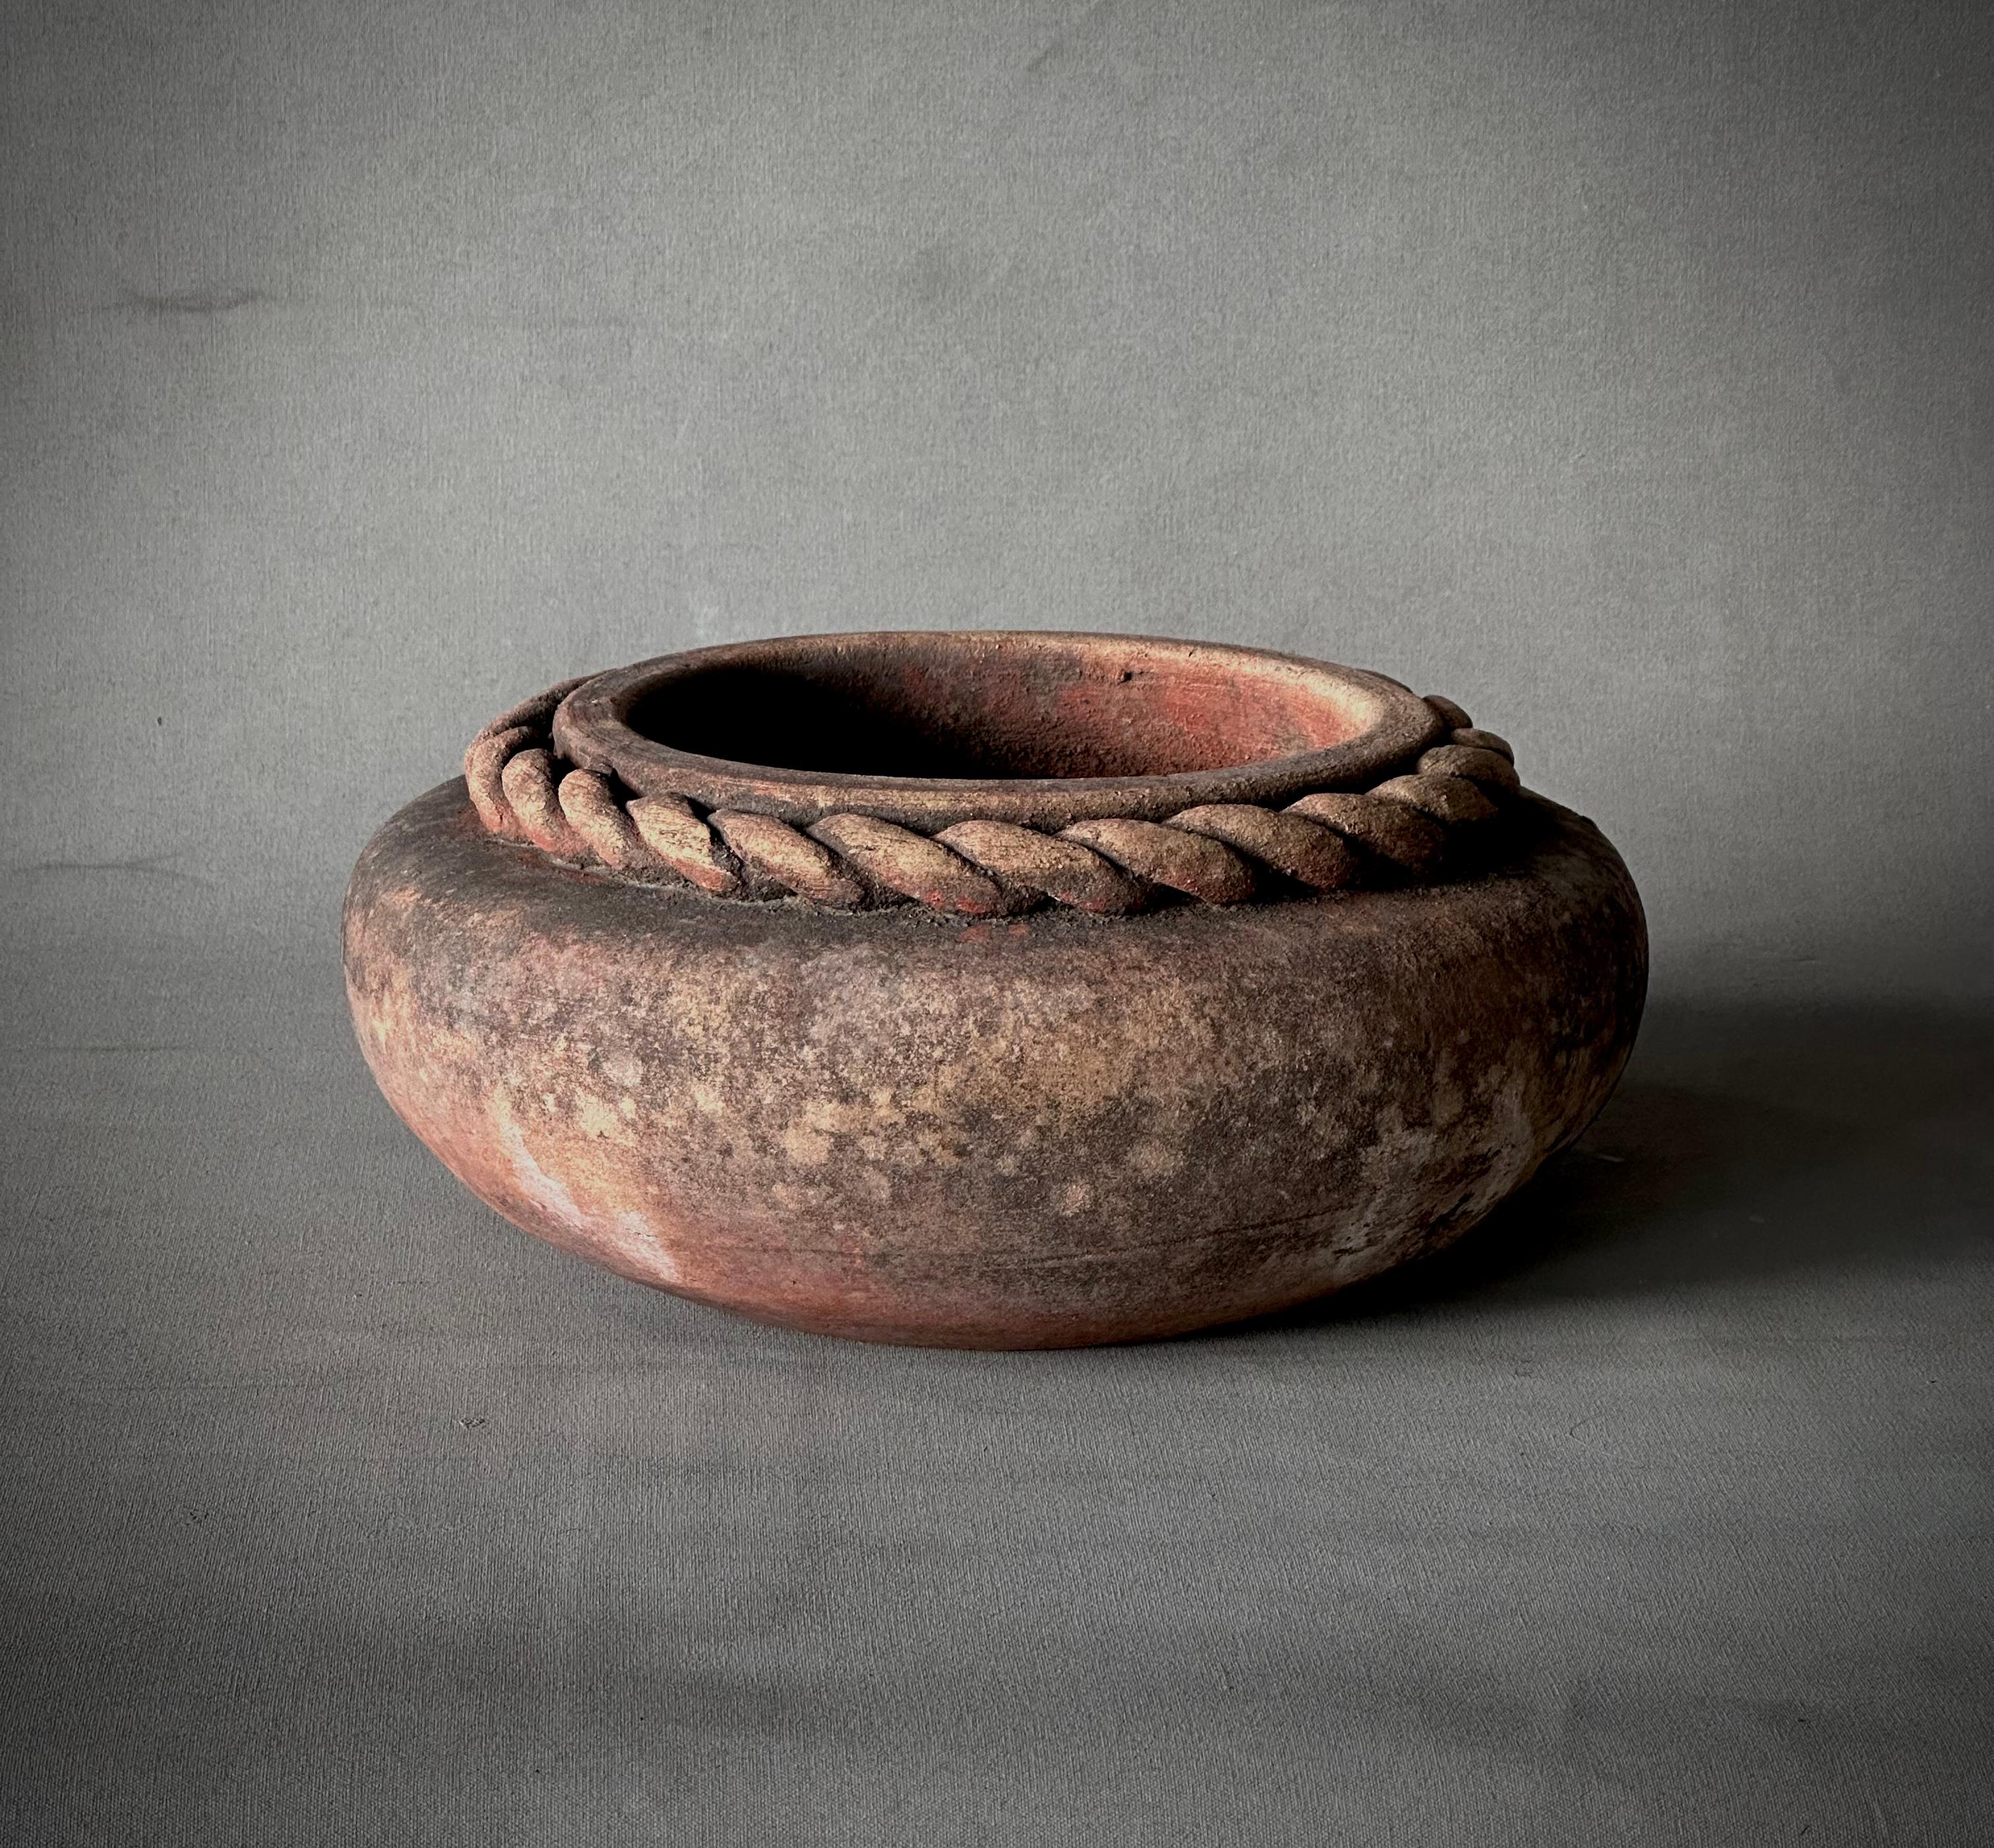 Decorative terracotta vessel from Jalisco, Mexico with unique carved rope banding at rim and wide, shallow shape. Perfect as a planter or rustic and sculptural decorative accent. 

